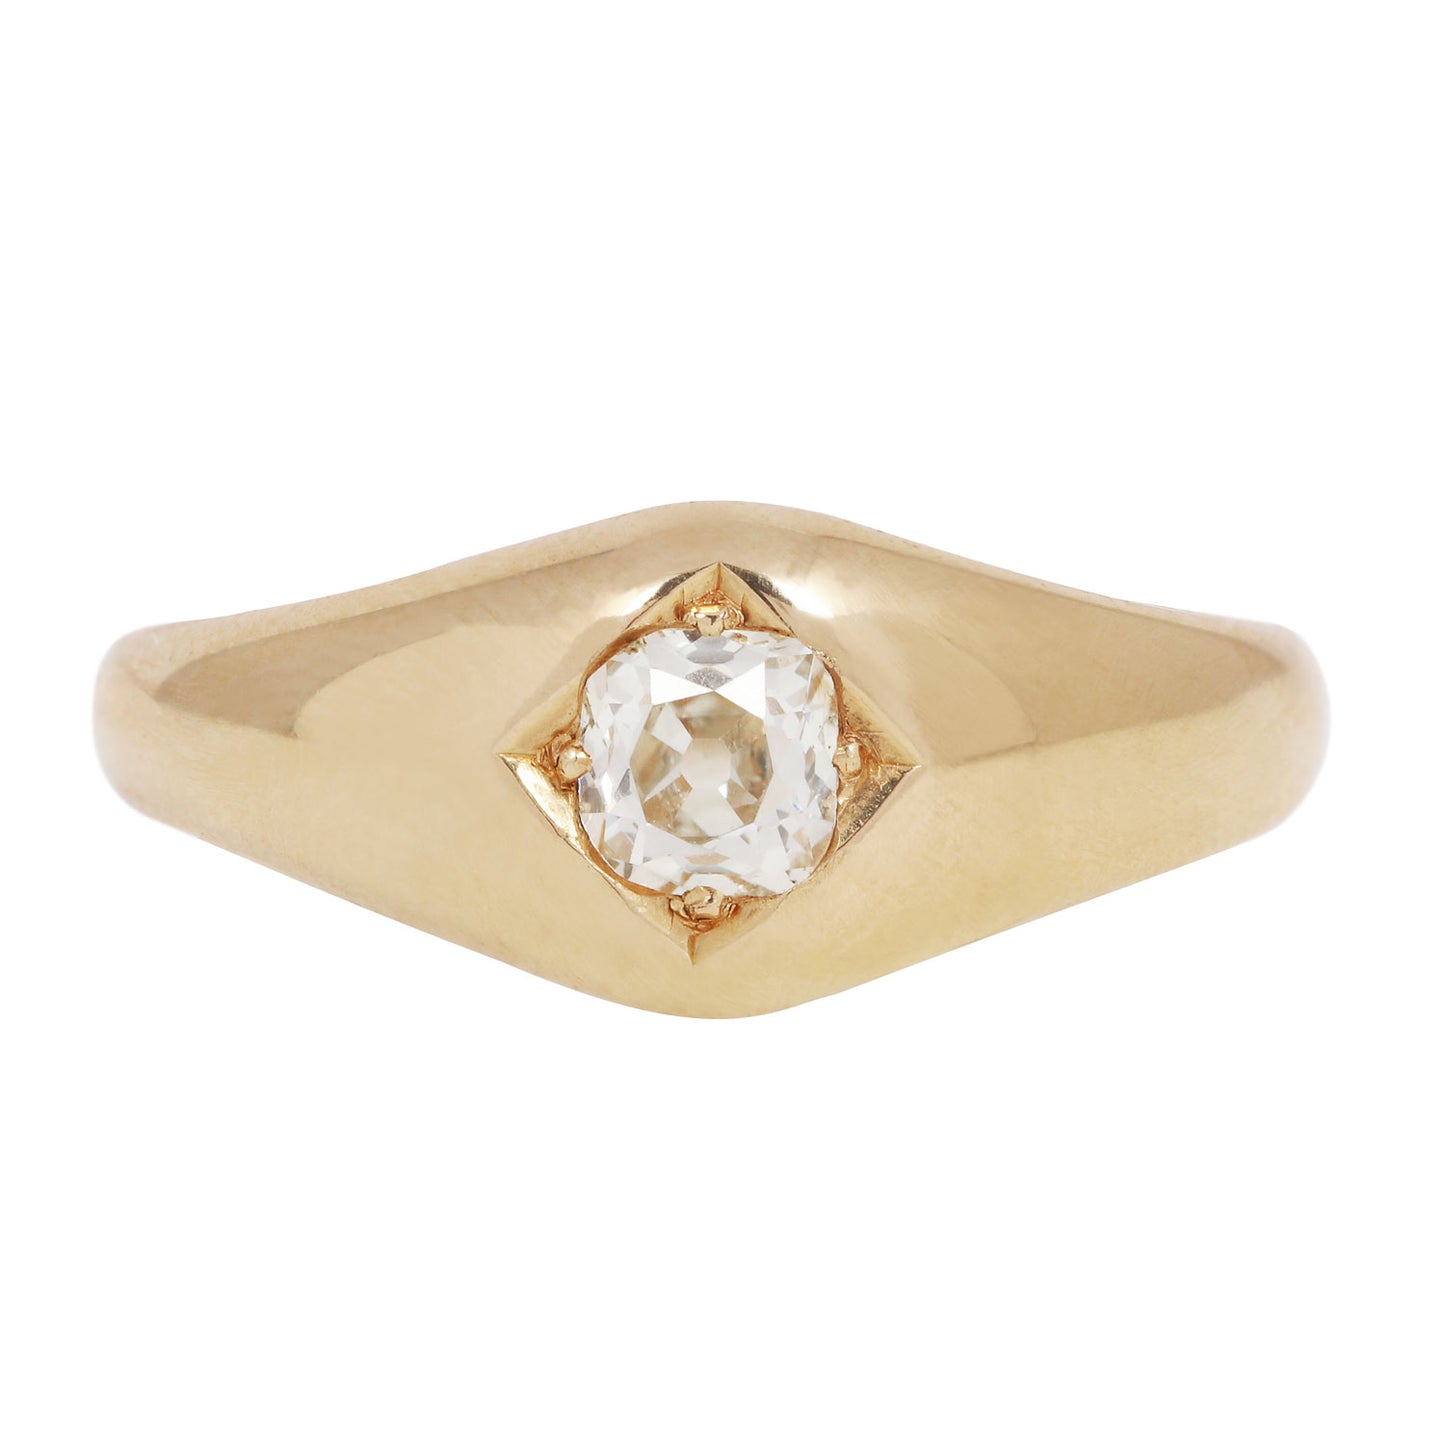 Grand Star Solitaire Ring